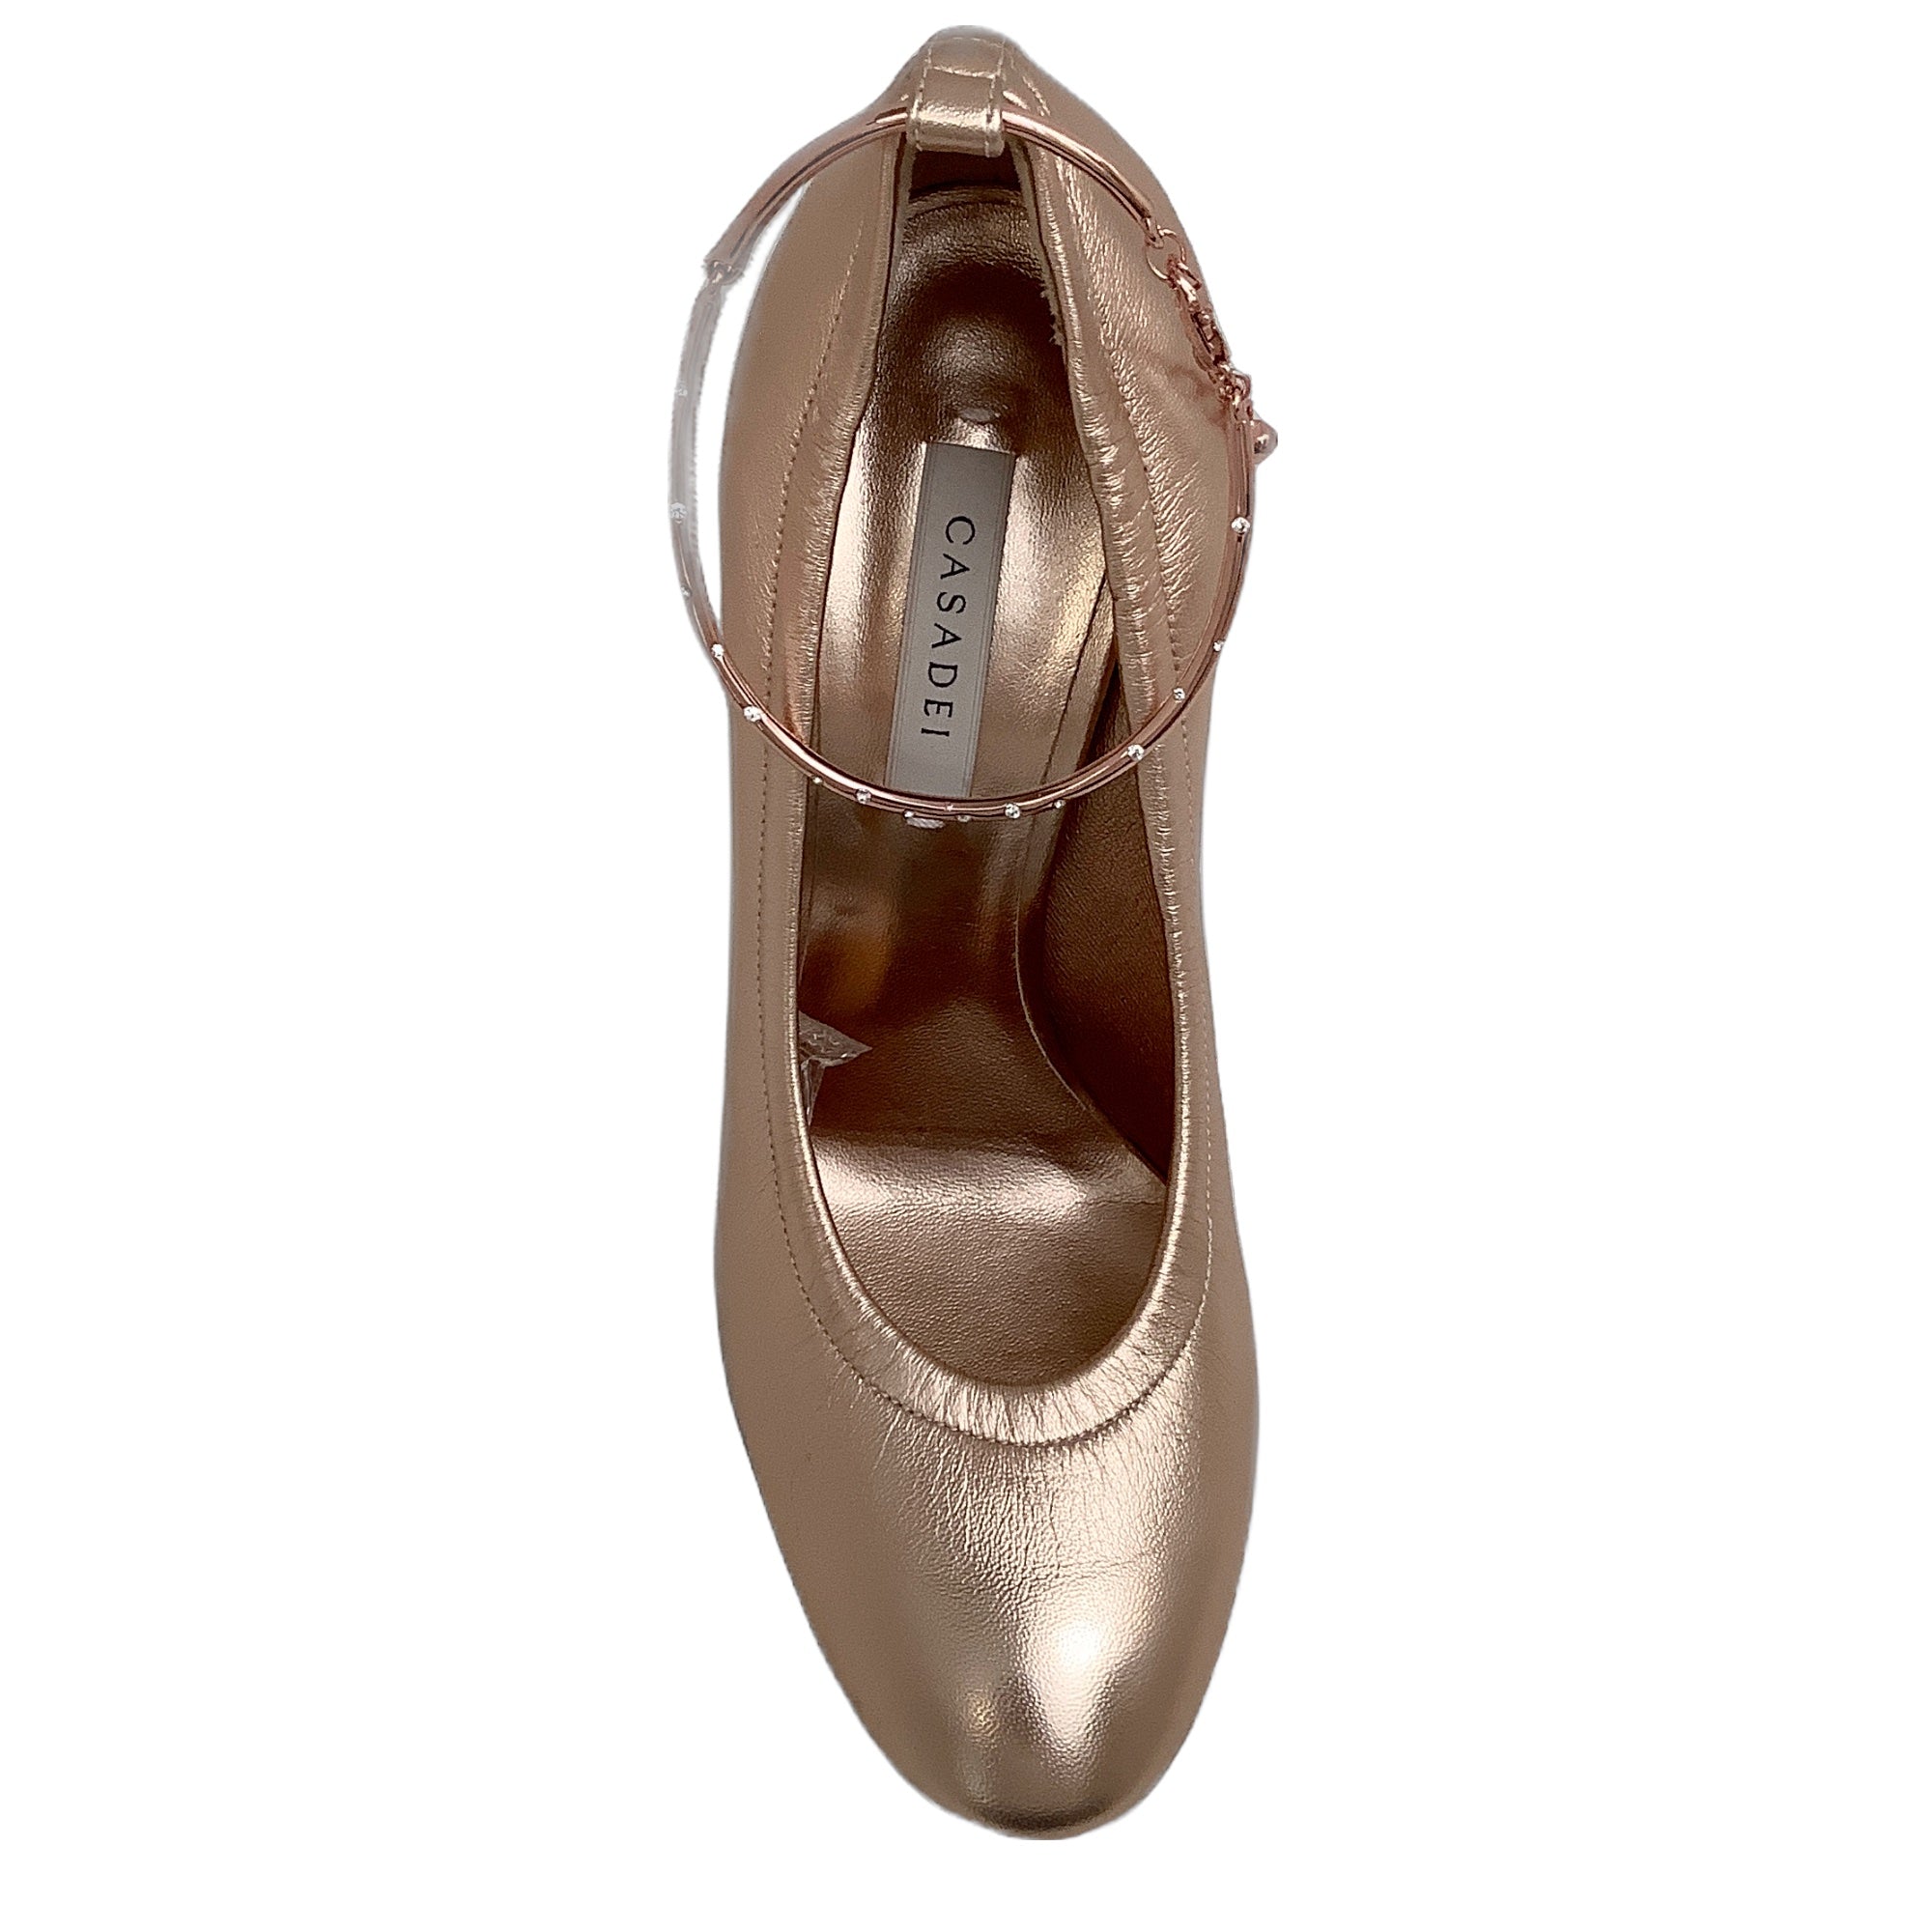 Casadei Rose Gold Metallic Ballet Pumps with Ankle Strap